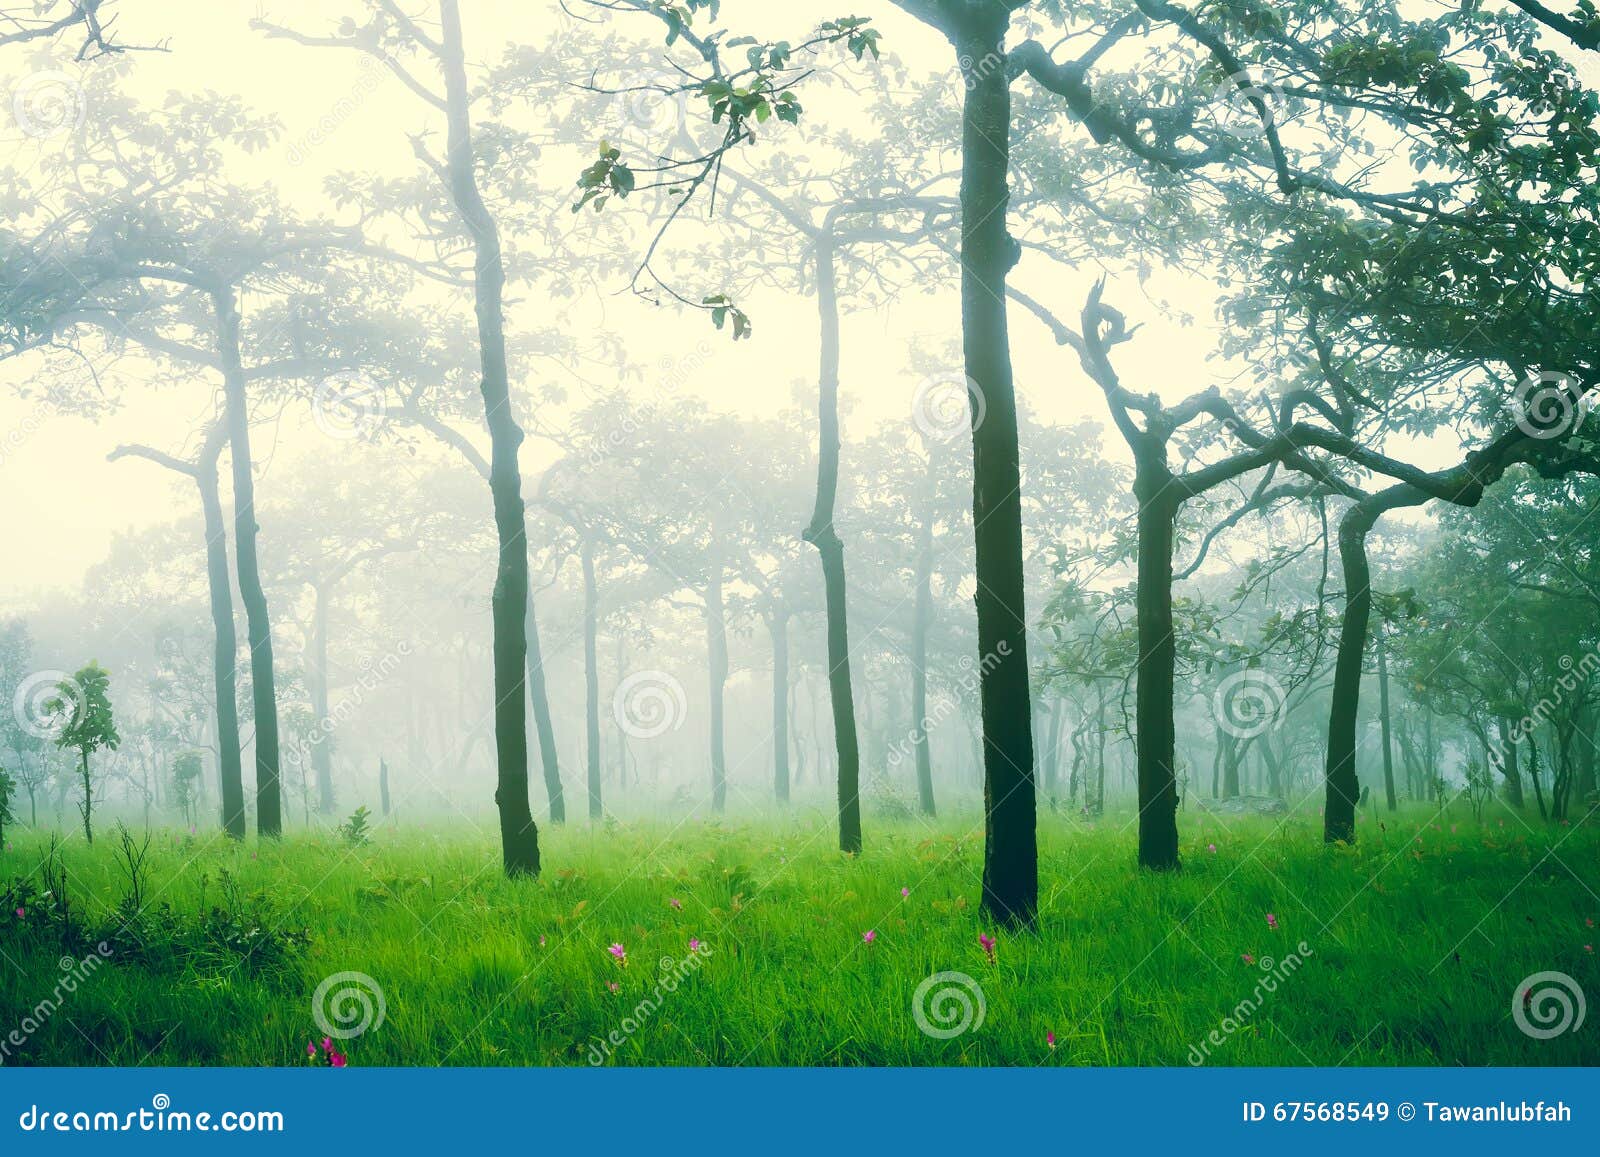 soft focus of misty forest after rain, abstract nature background.